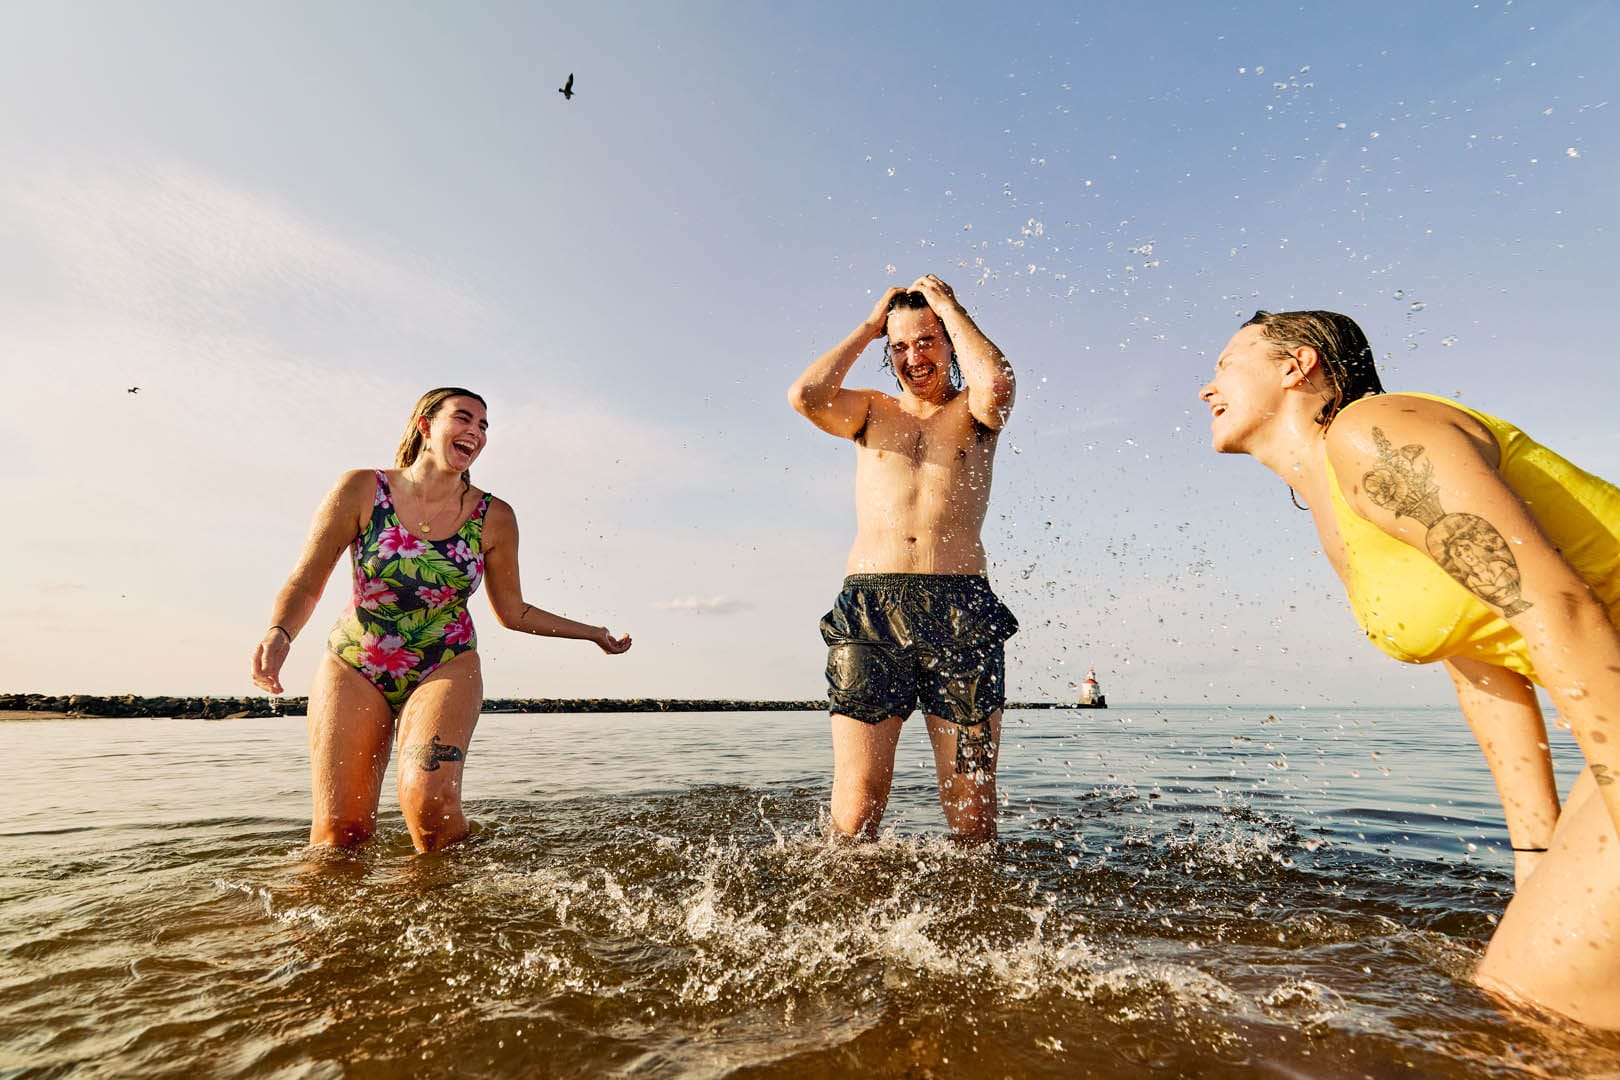 Three people having fun swimming in Lake Superior splashing each other and laughing. The sun is very warm but the water is most likely cold.